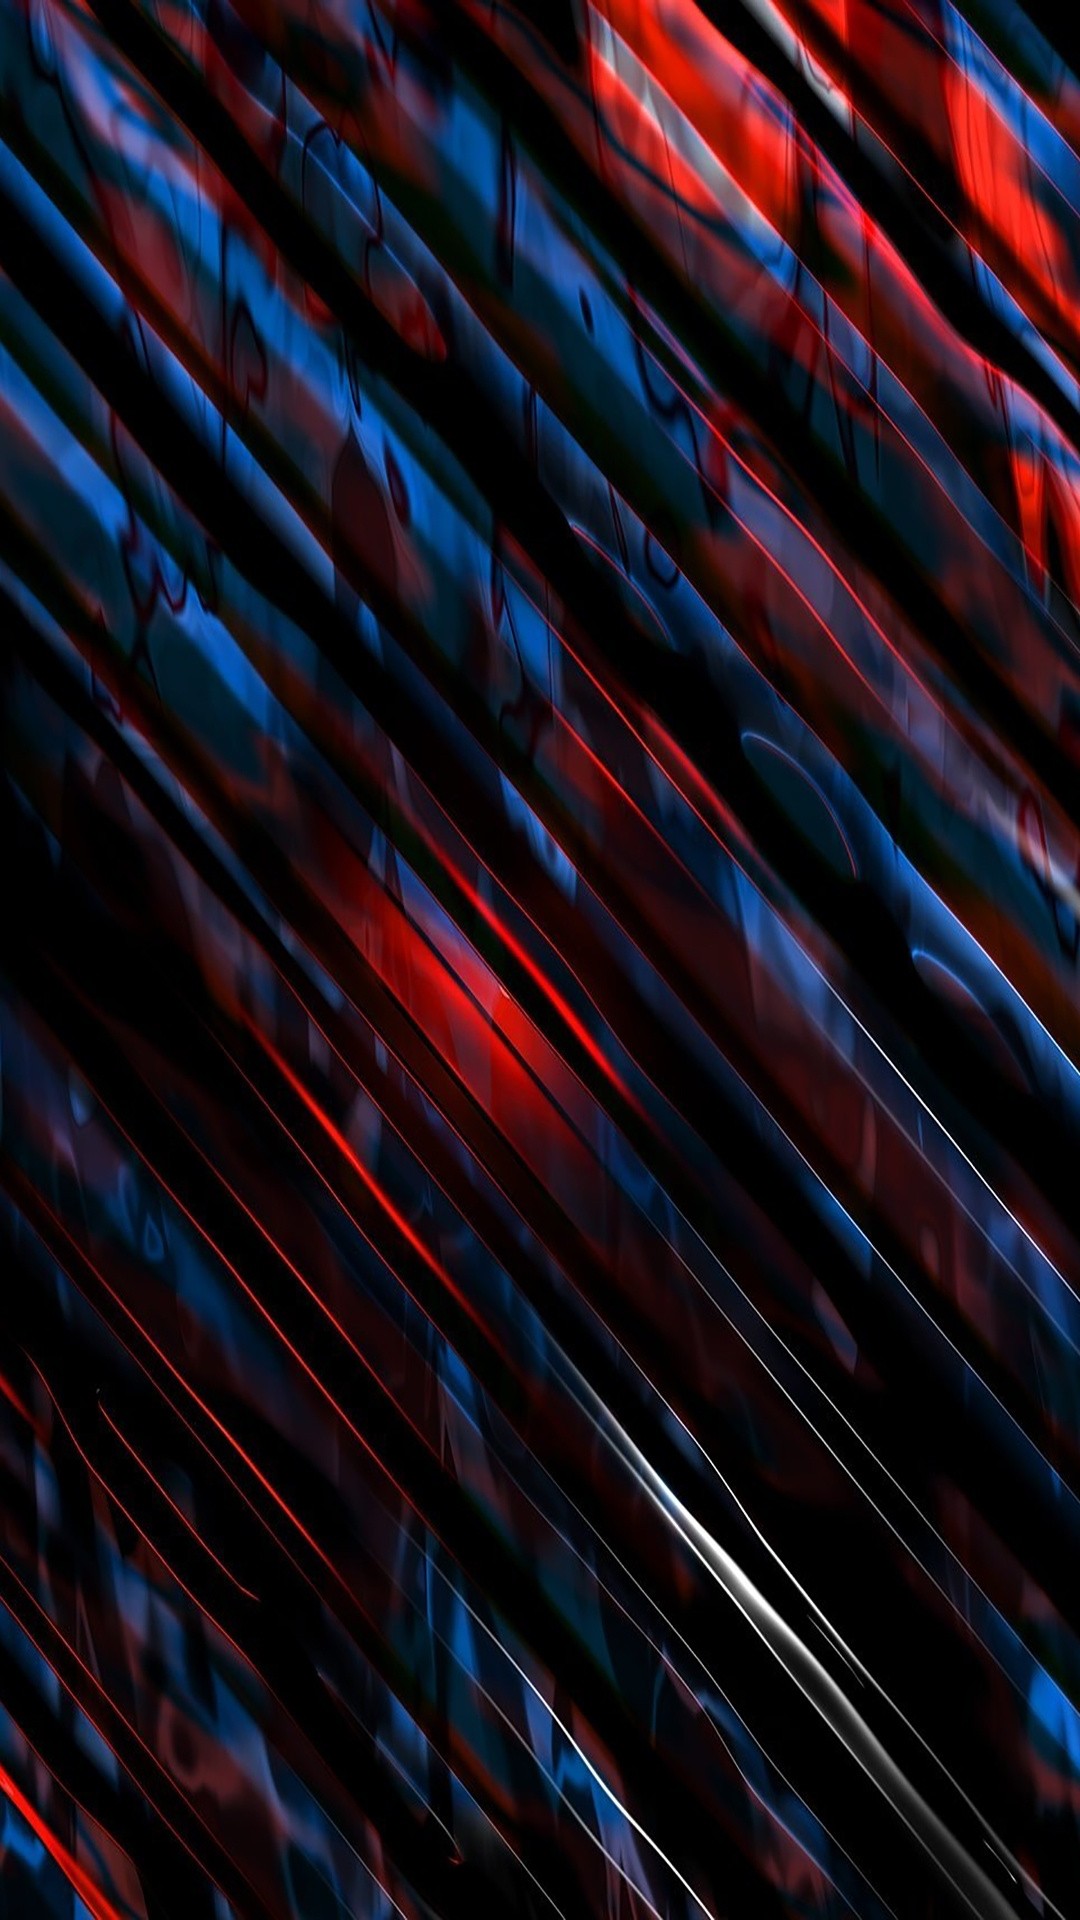 Red And Blue iphone 6 wallpaper